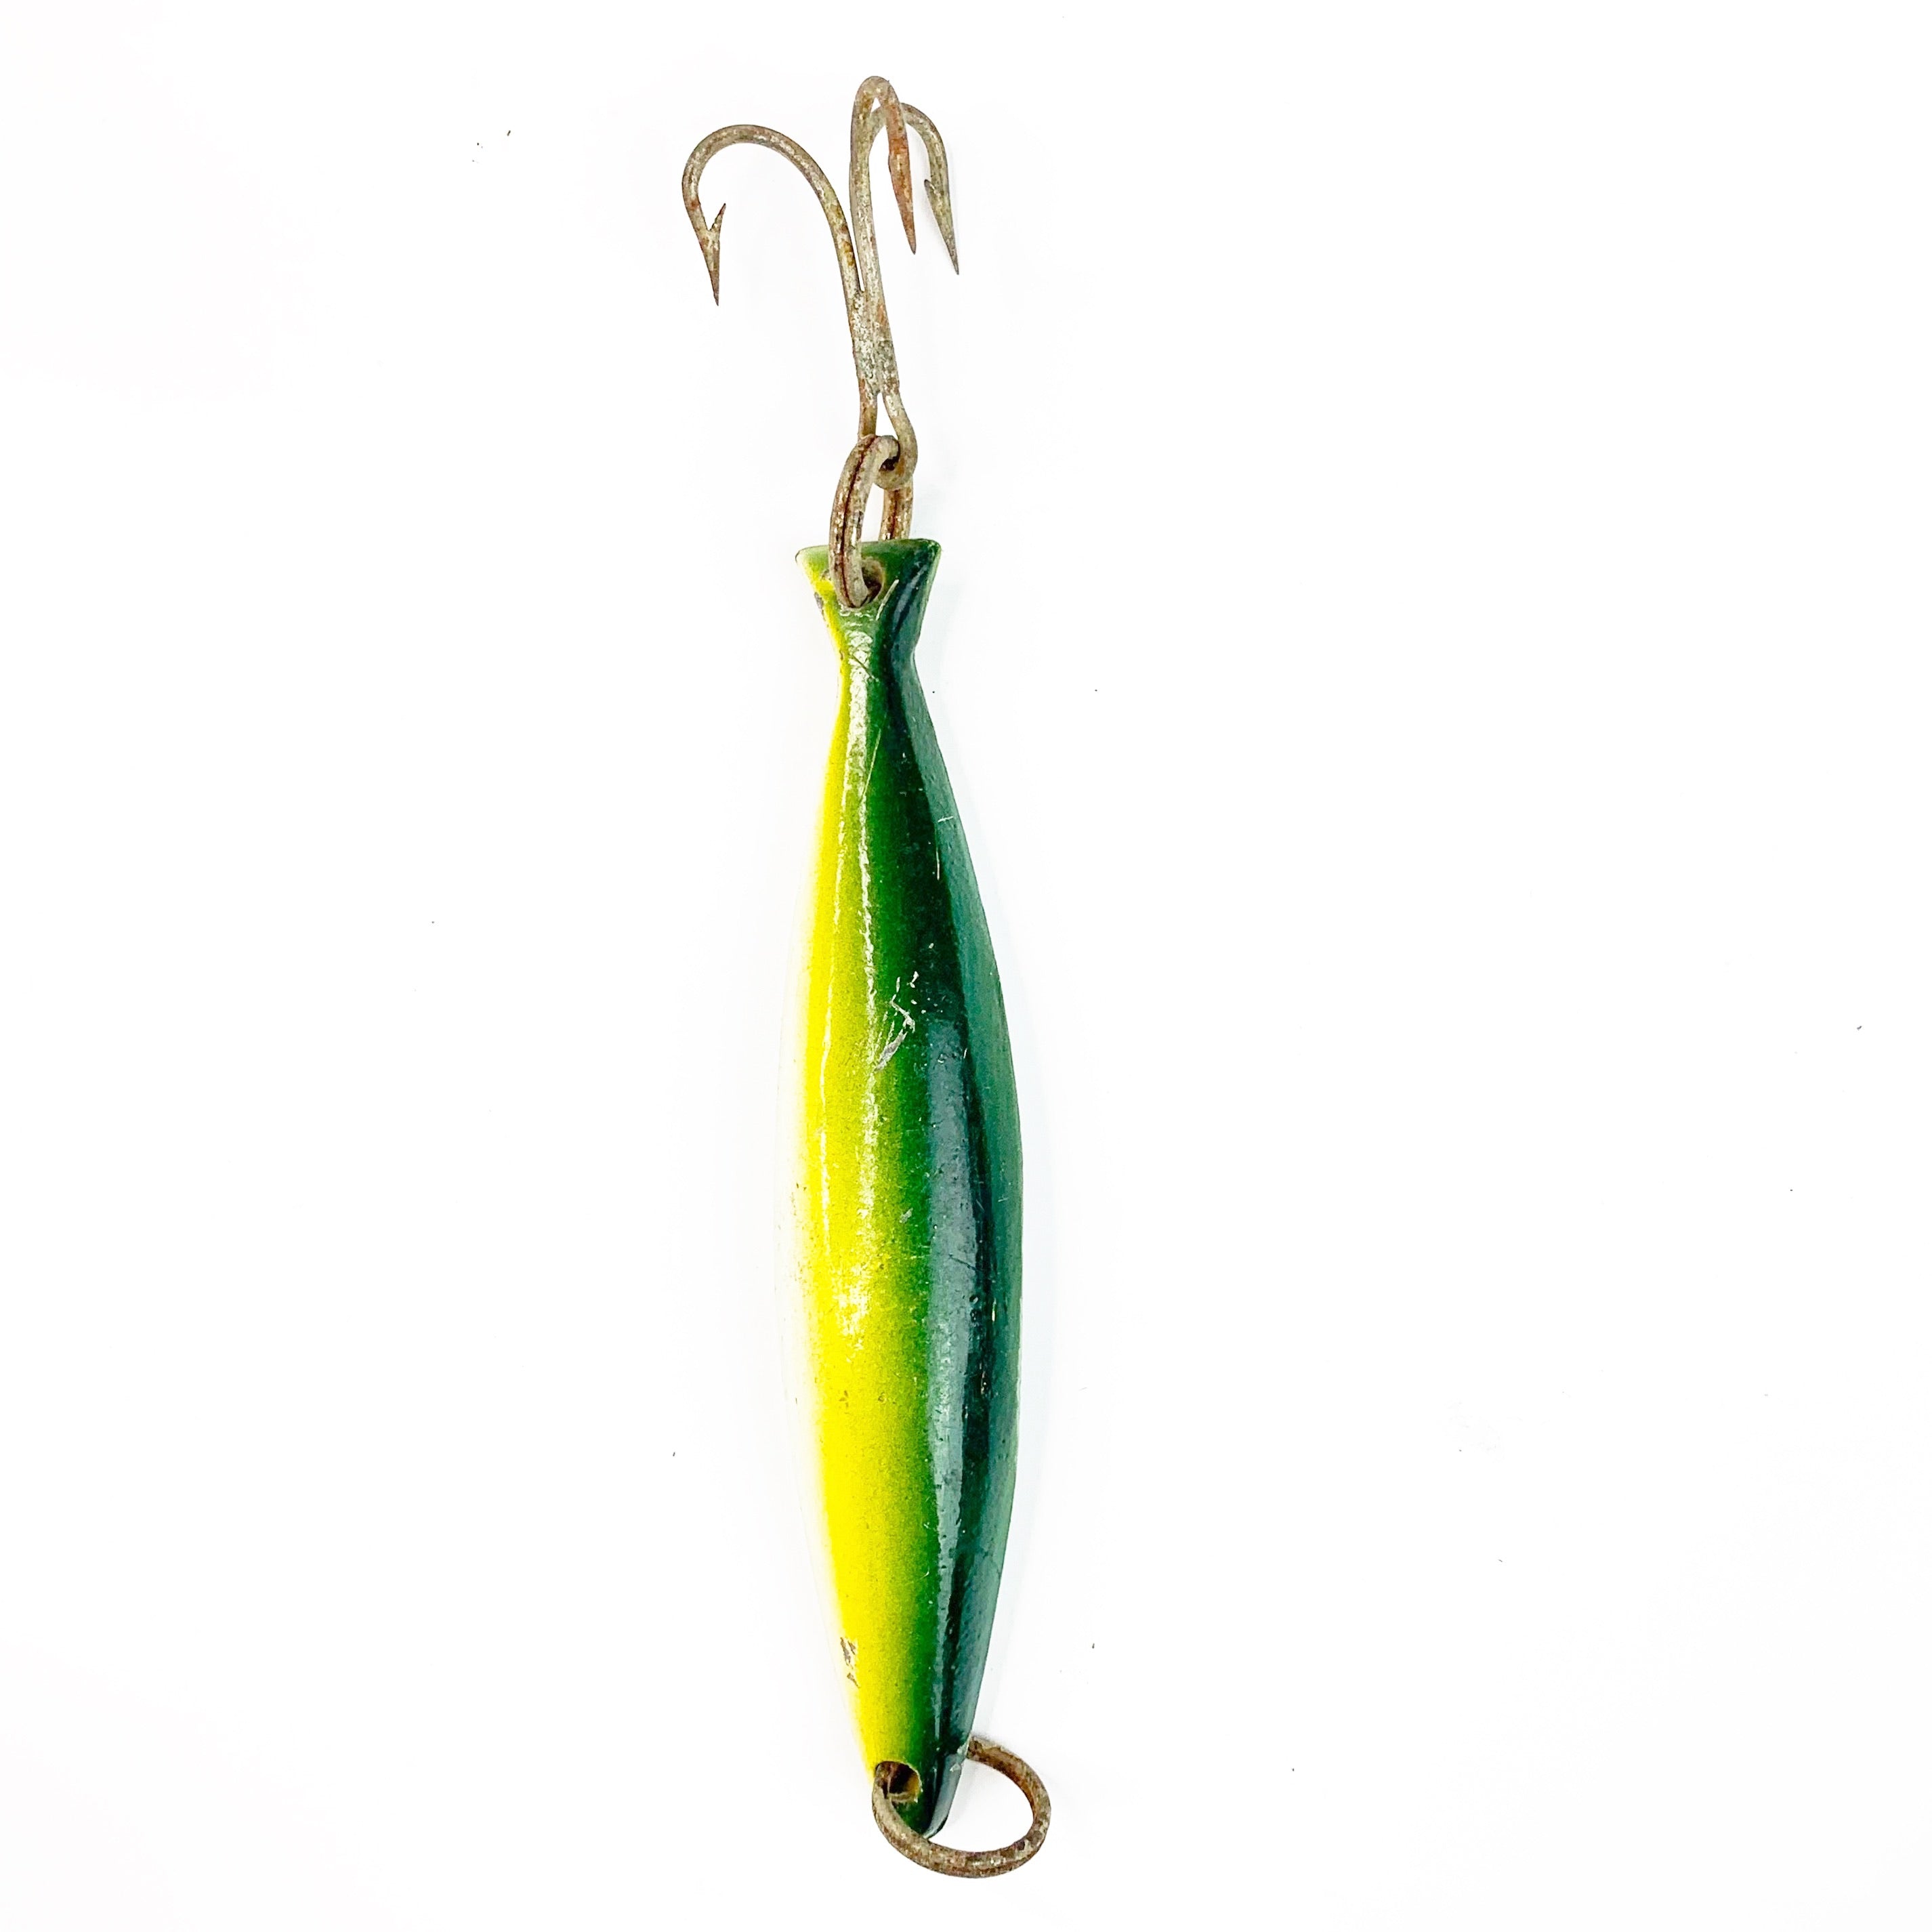 Vintage Metal Saltwater Fishing Straggler Yellow / Green Lure - The Stand  Alone